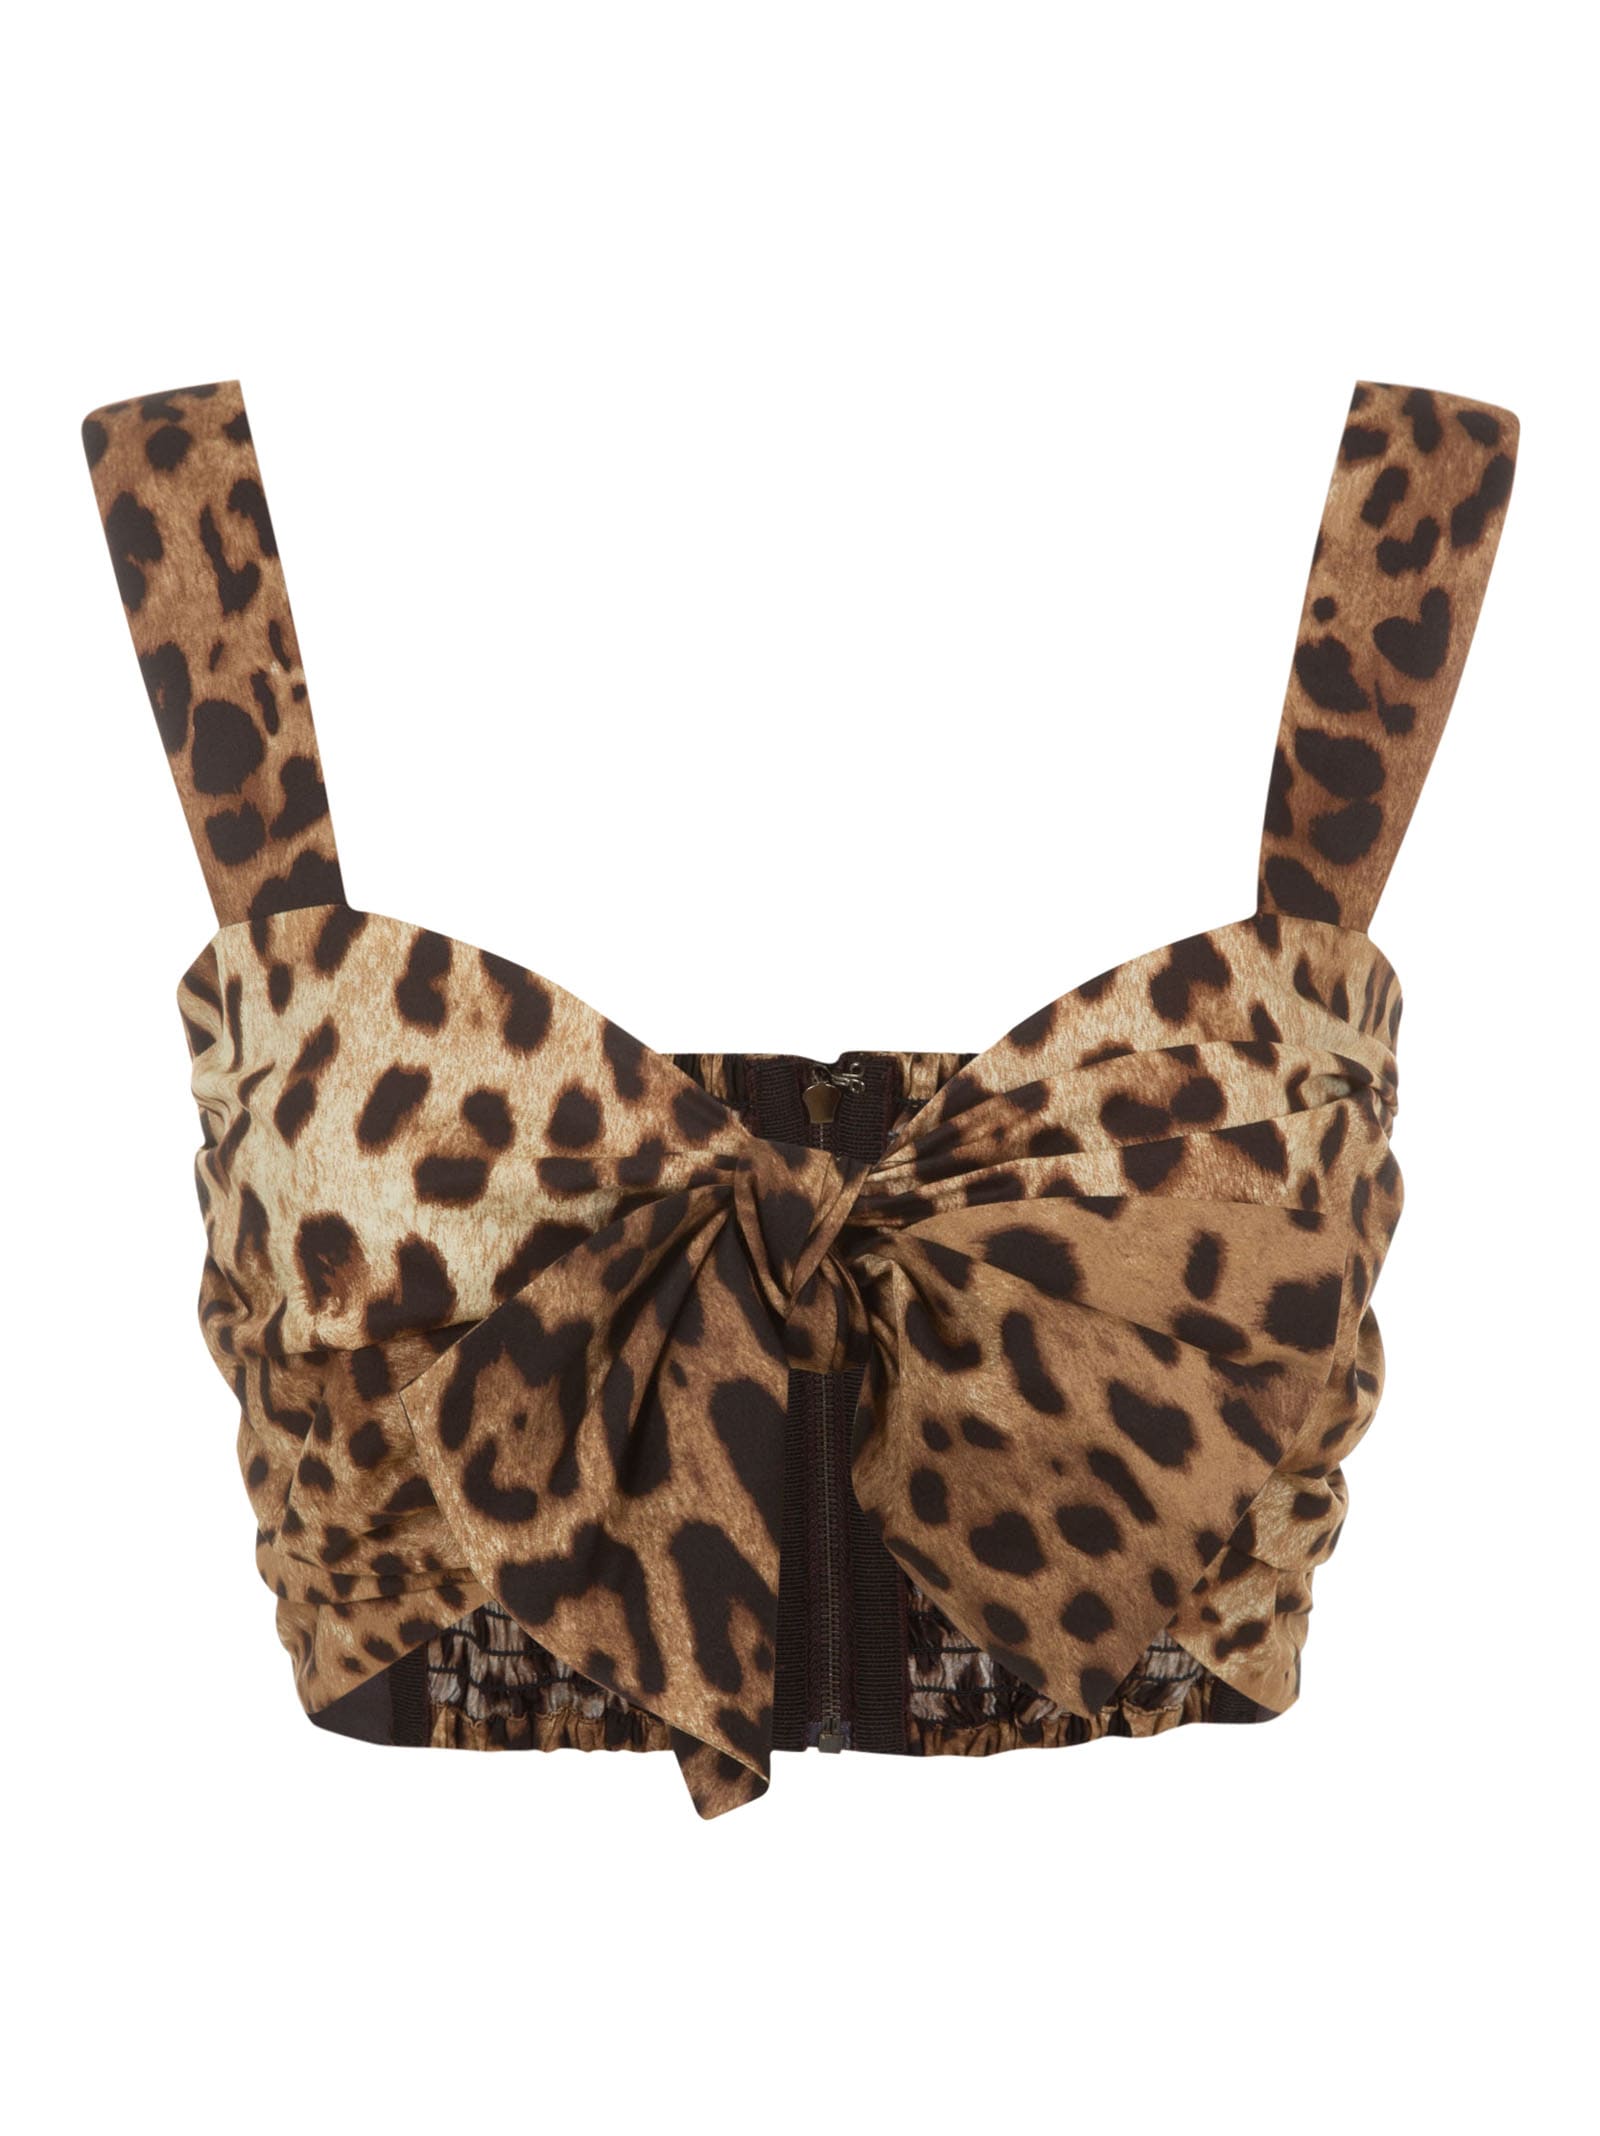 DOLCE & GABBANA BOW FRONT LEOPARD PRINTED TOP,11312466